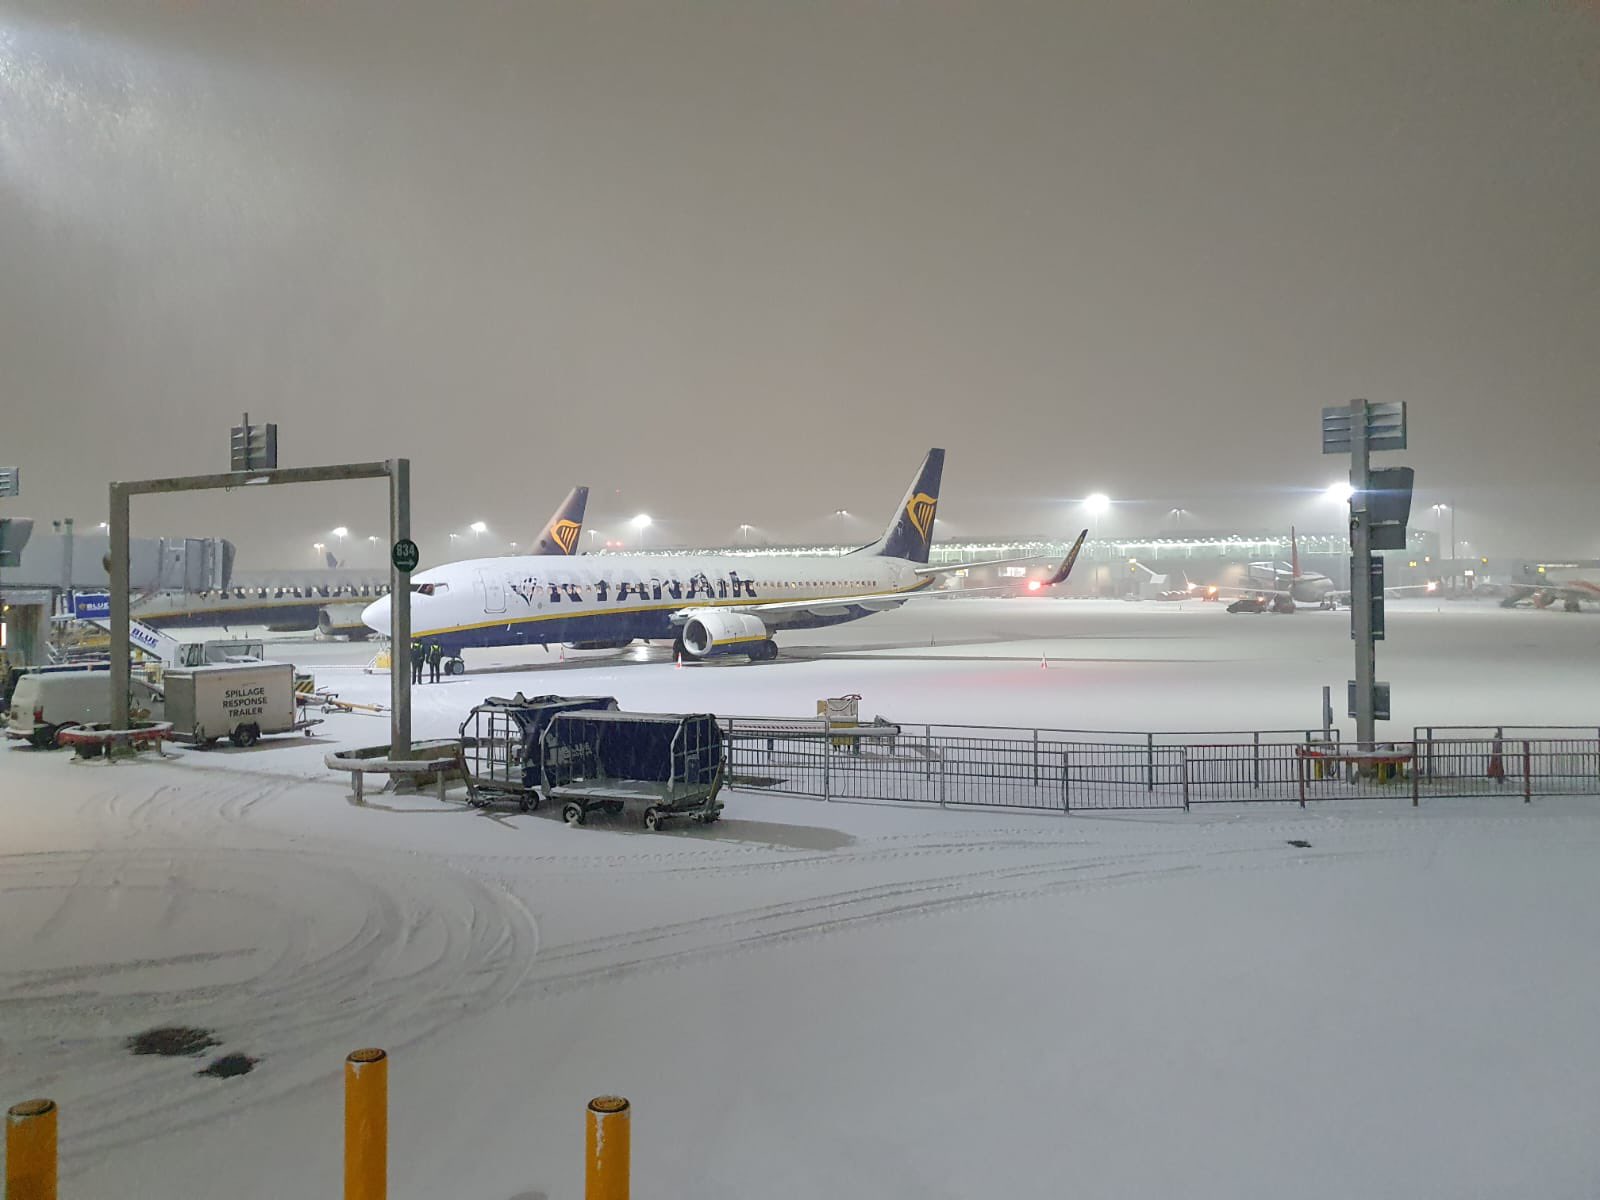 A Ryanair aircraft covered in snow at Stansted Airport.